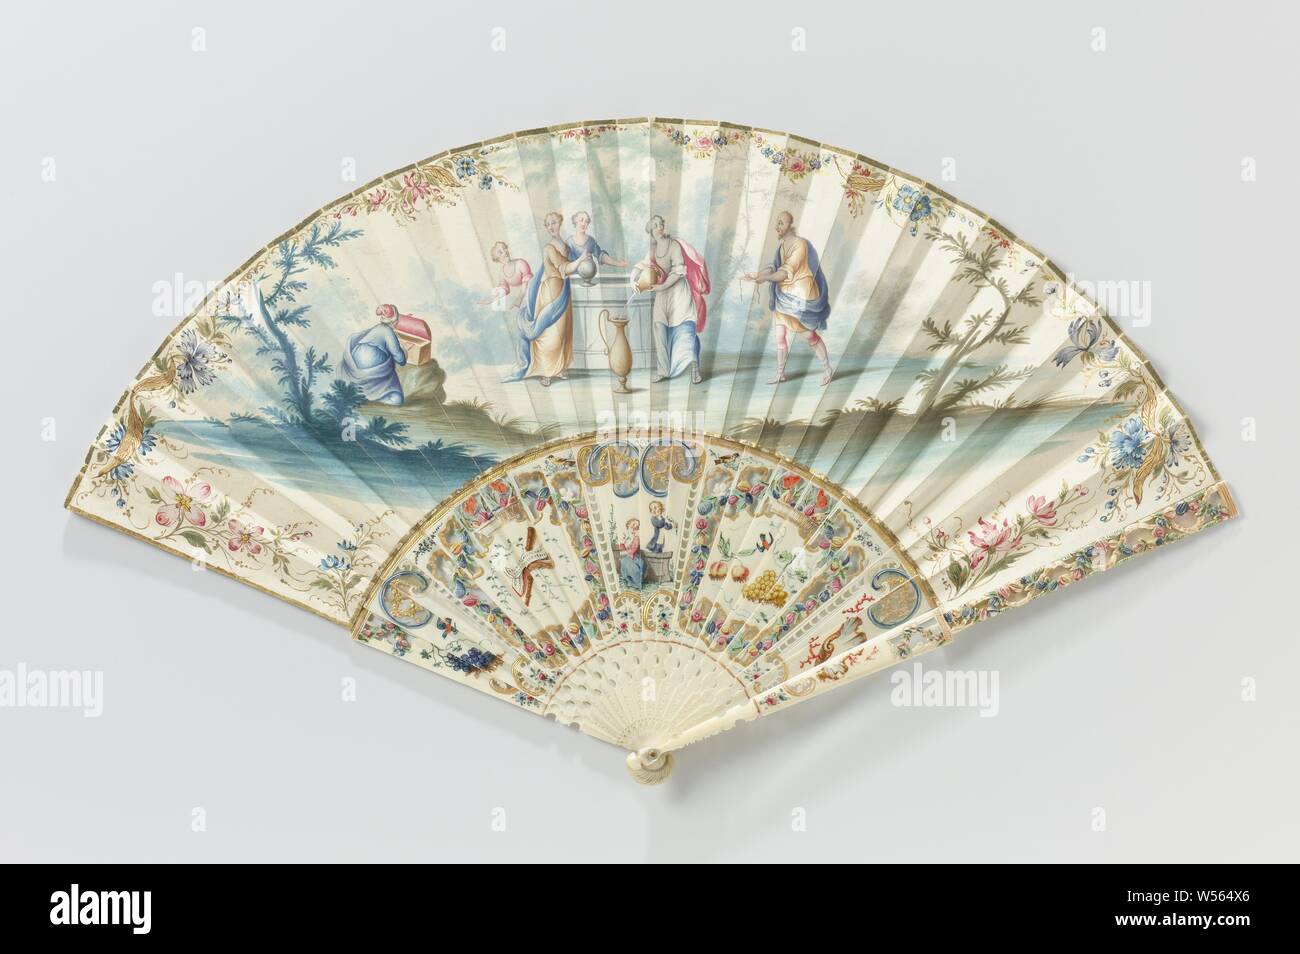 Folding fan with leaf on which in watercolor Eliezer, Rebecca at the source, on a frame of carved and painted ivory with mother-of-pearl, On the leaf is an episode from the much loved Bible story about bridal recruitment and marriage van Isaac, which was frequently depicted on fan blades. The most commonly used - similarly here - was the moment when Eliezer handed over the jewelry and thus made the actual proposal (Gen. 24:22). This is not surprising, since many of these fans were intended as a wedding gift. Eliezer was sent by Abraham to the city of Nahor to find a bride for his son Isaac Stock Photo